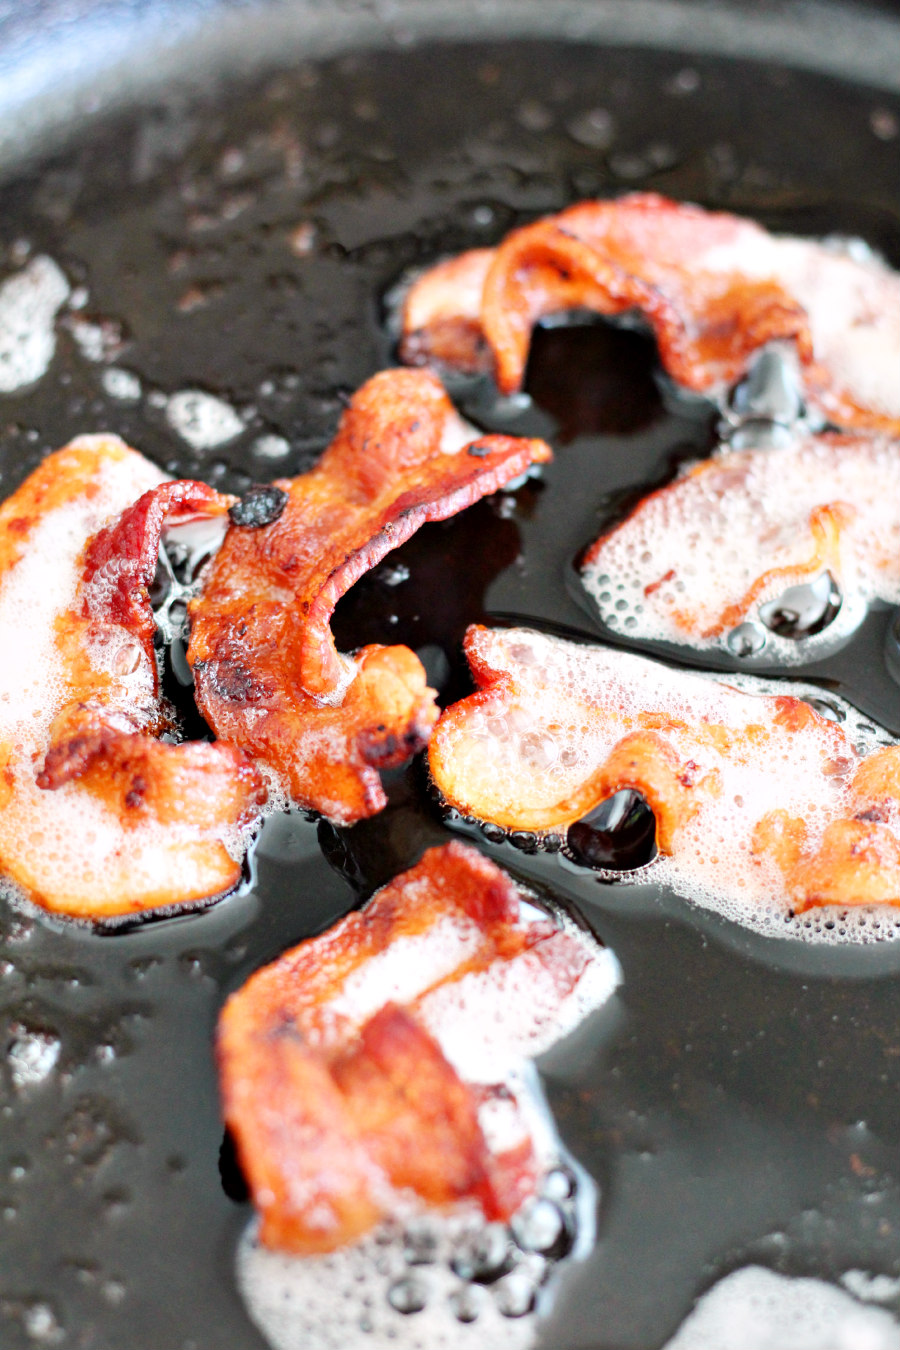 Strips of bacon being cooked in a cast iron skillet.